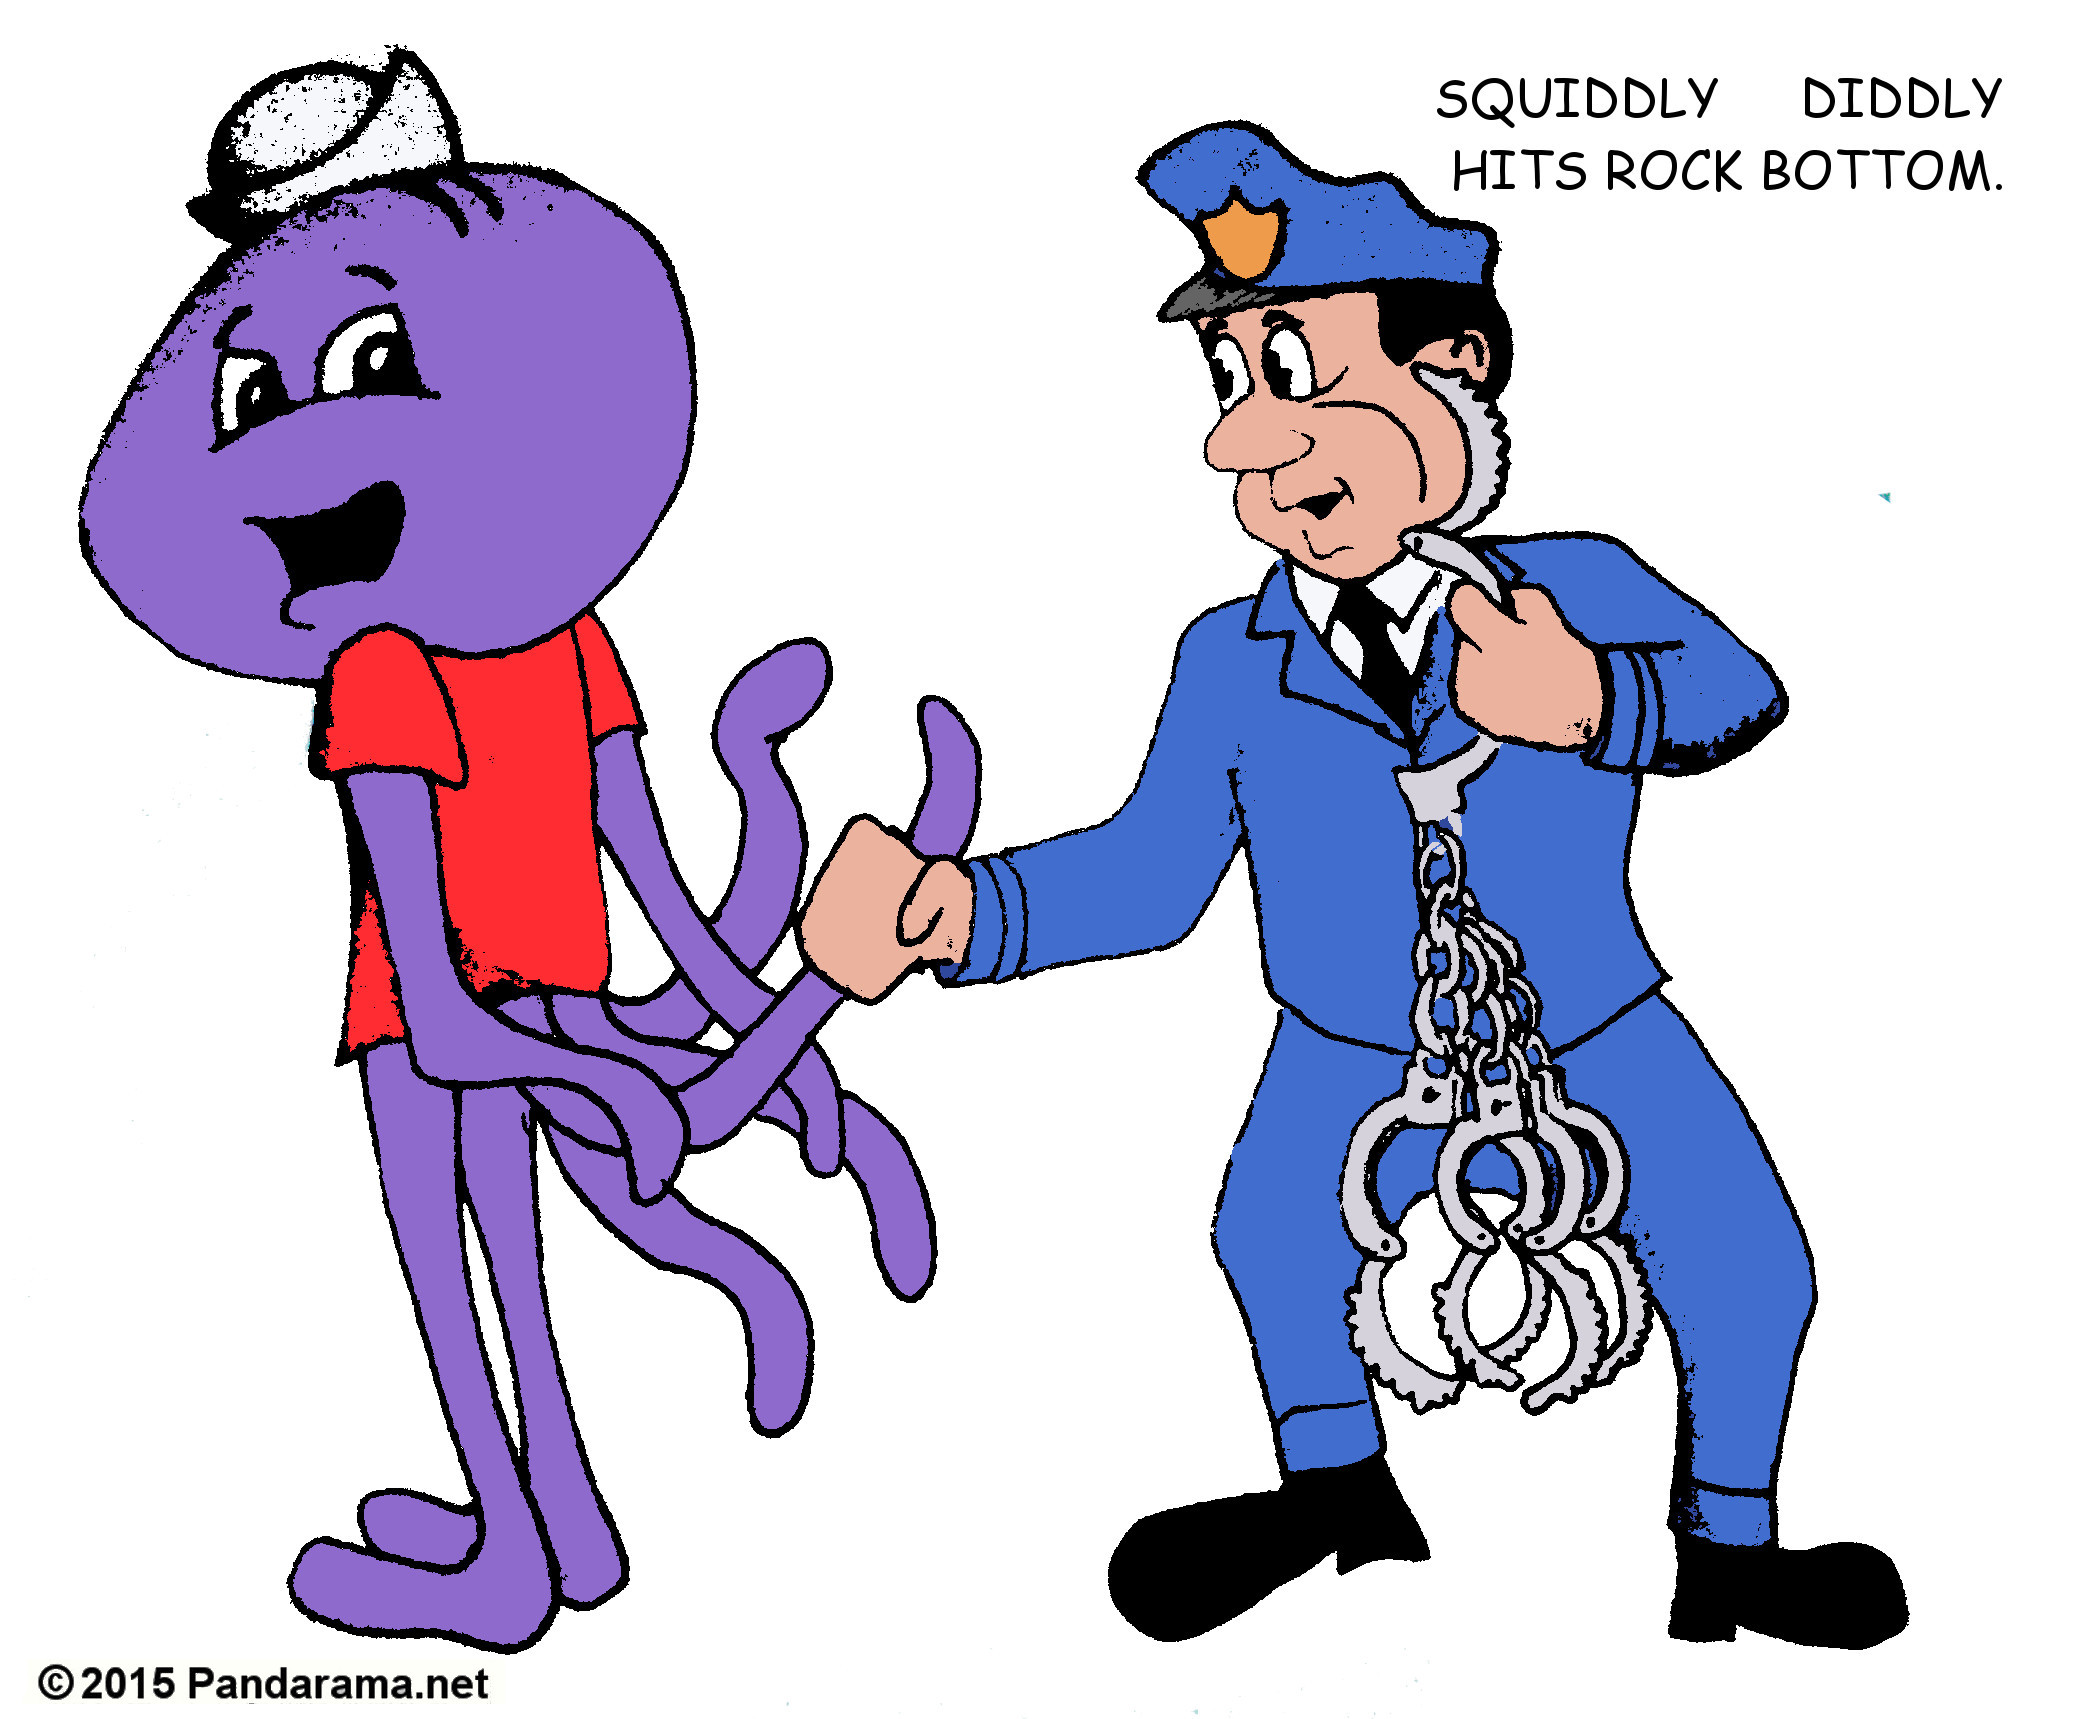 Pandarama.net Pandarama satirical cartoon of Squiddly Diddly getting handcuffed by a copy with special cuffs.